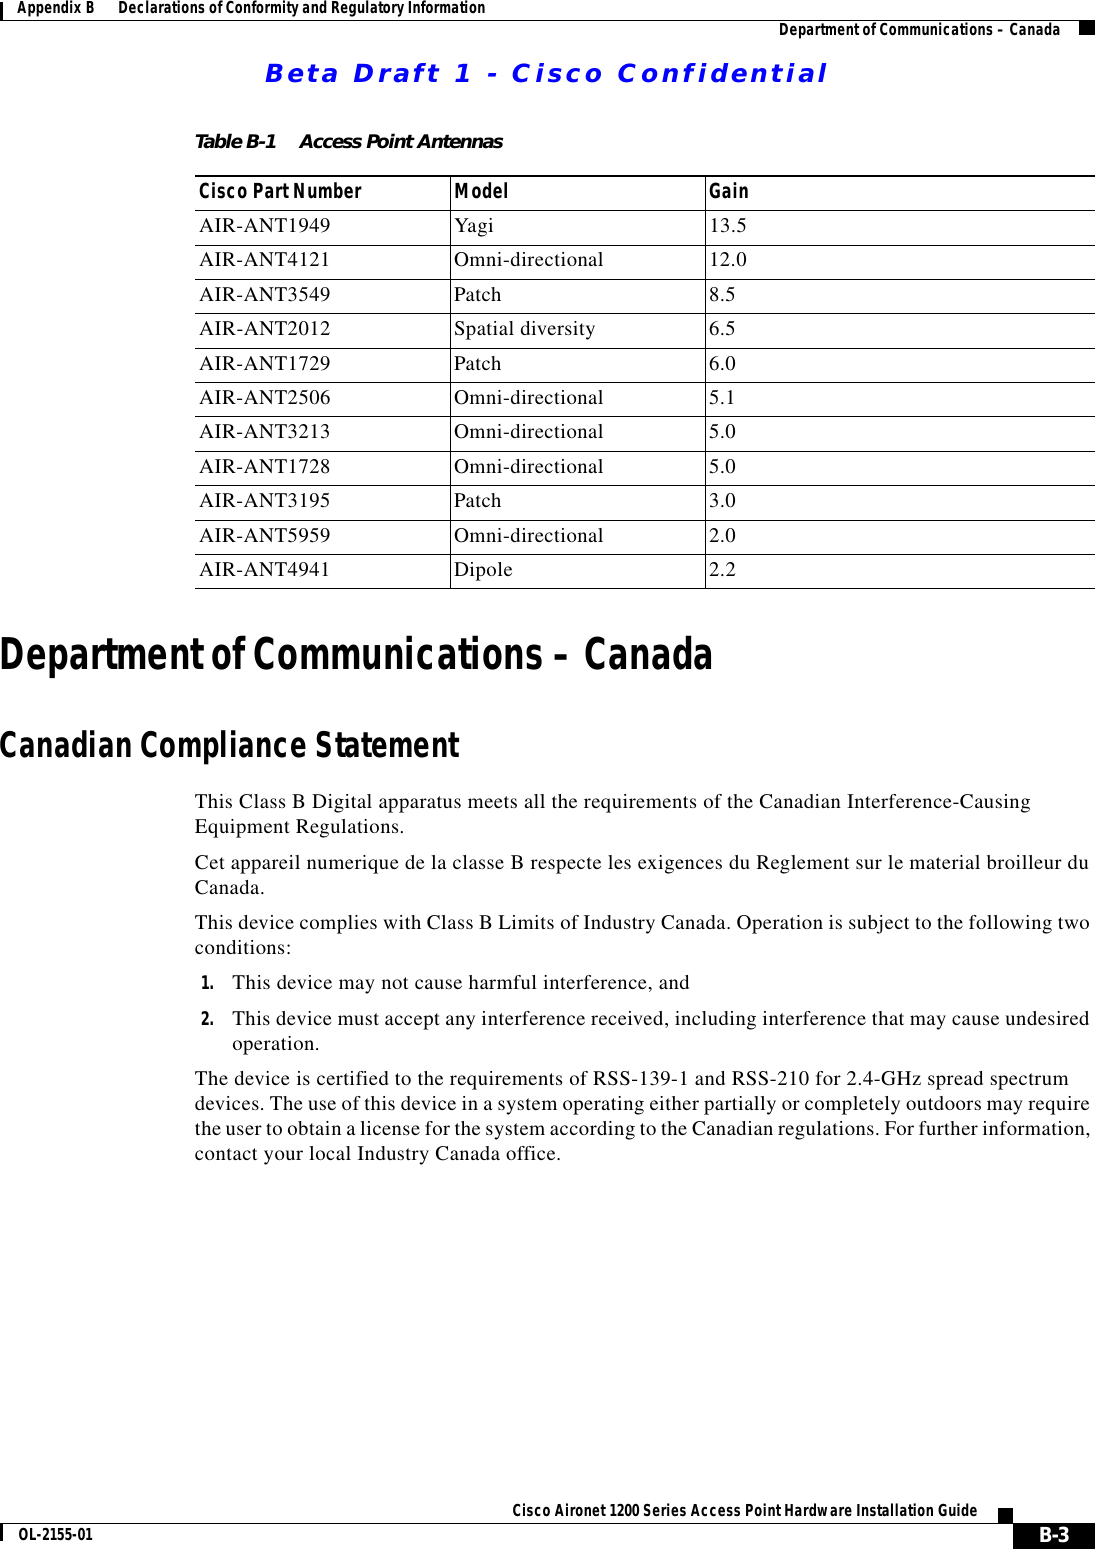 Beta Draft 1 - Cisco ConfidentialB-3Cisco Aironet 1200 Series Access Point Hardware Installation GuideOL-2155-01Appendix B      Declarations of Conformity and Regulatory Information Department of Communications – CanadaDepartment of Communications – CanadaCanadian Compliance StatementThis Class B Digital apparatus meets all the requirements of the Canadian Interference-Causing Equipment Regulations.Cet appareil numerique de la classe B respecte les exigences du Reglement sur le material broilleur du Canada.This device complies with Class B Limits of Industry Canada. Operation is subject to the following two conditions:1. This device may not cause harmful interference, and2. This device must accept any interference received, including interference that may cause undesired operation.The device is certified to the requirements of RSS-139-1 and RSS-210 for 2.4-GHz spread spectrum devices. The use of this device in a system operating either partially or completely outdoors may require the user to obtain a license for the system according to the Canadian regulations. For further information, contact your local Industry Canada office.Table B-1 Access Point AntennasCisco Part Number Model GainAIR-ANT1949 Yagi 13.5AIR-ANT4121 Omni-directional 12.0AIR-ANT3549 Patch 8.5AIR-ANT2012 Spatial diversity 6.5AIR-ANT1729 Patch 6.0AIR-ANT2506 Omni-directional 5.1AIR-ANT3213 Omni-directional 5.0AIR-ANT1728 Omni-directional 5.0AIR-ANT3195 Patch 3.0AIR-ANT5959 Omni-directional 2.0AIR-ANT4941 Dipole 2.2